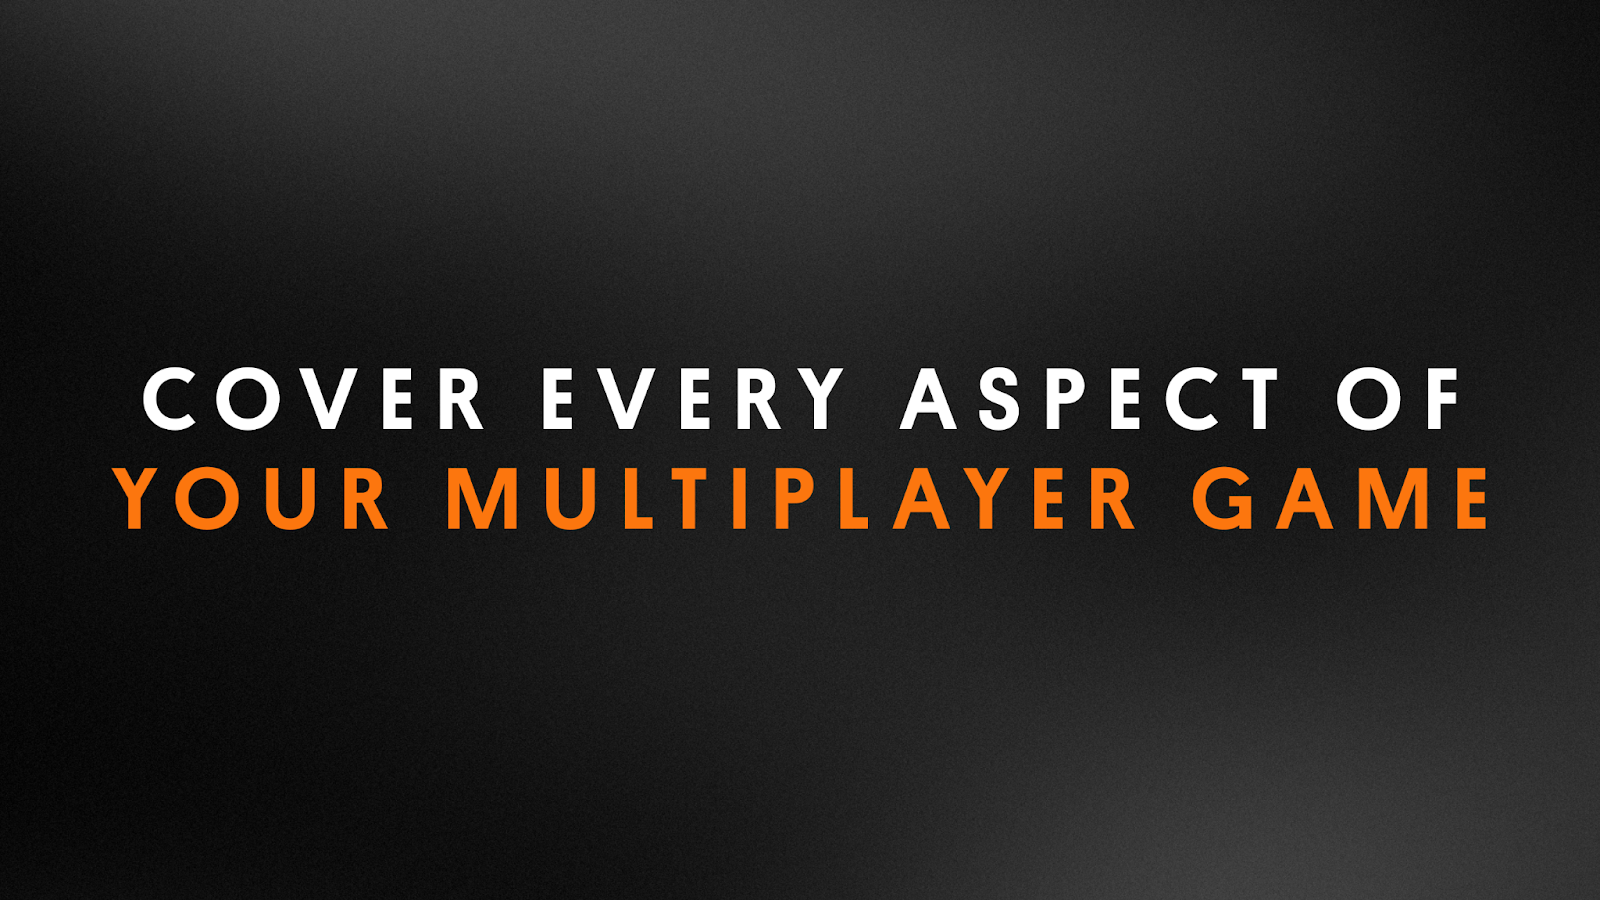 Unity: Games Focus | Cover every aspect of your multiplayer game